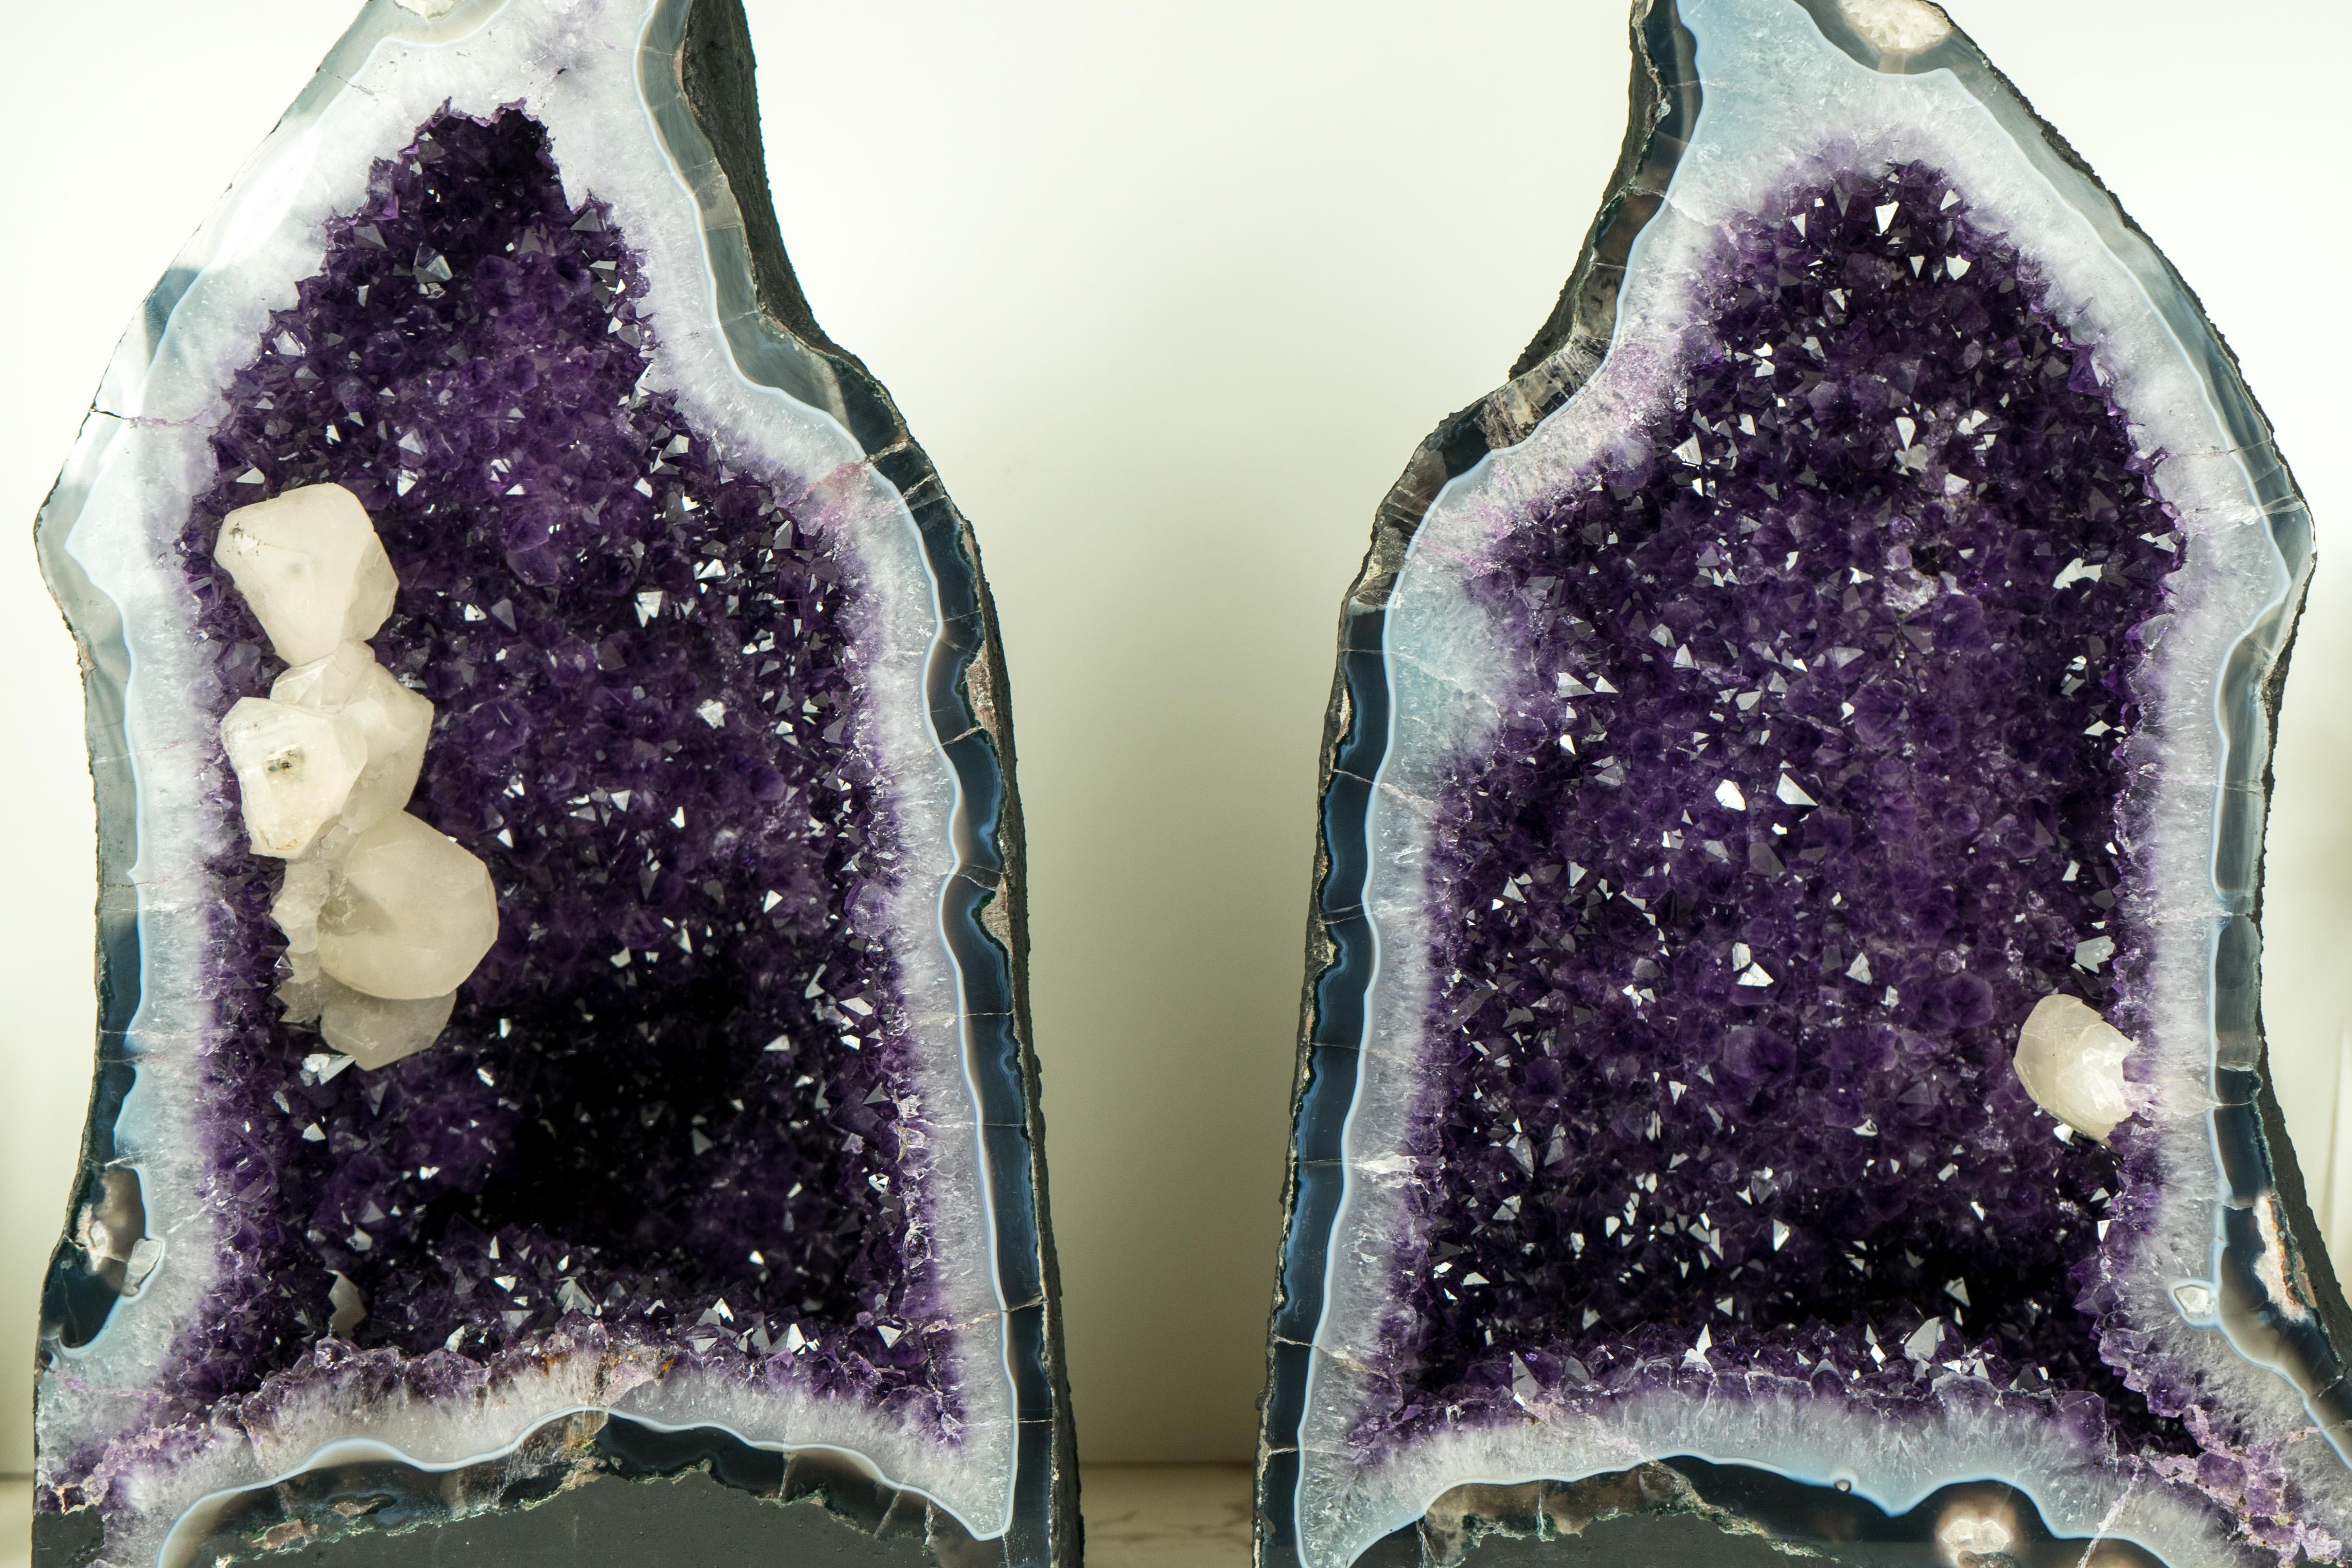 Brazilian Pair of Amethyst Geodes with Purple Amethyst Druzy, Blue Lace Agate, Calcite For Sale